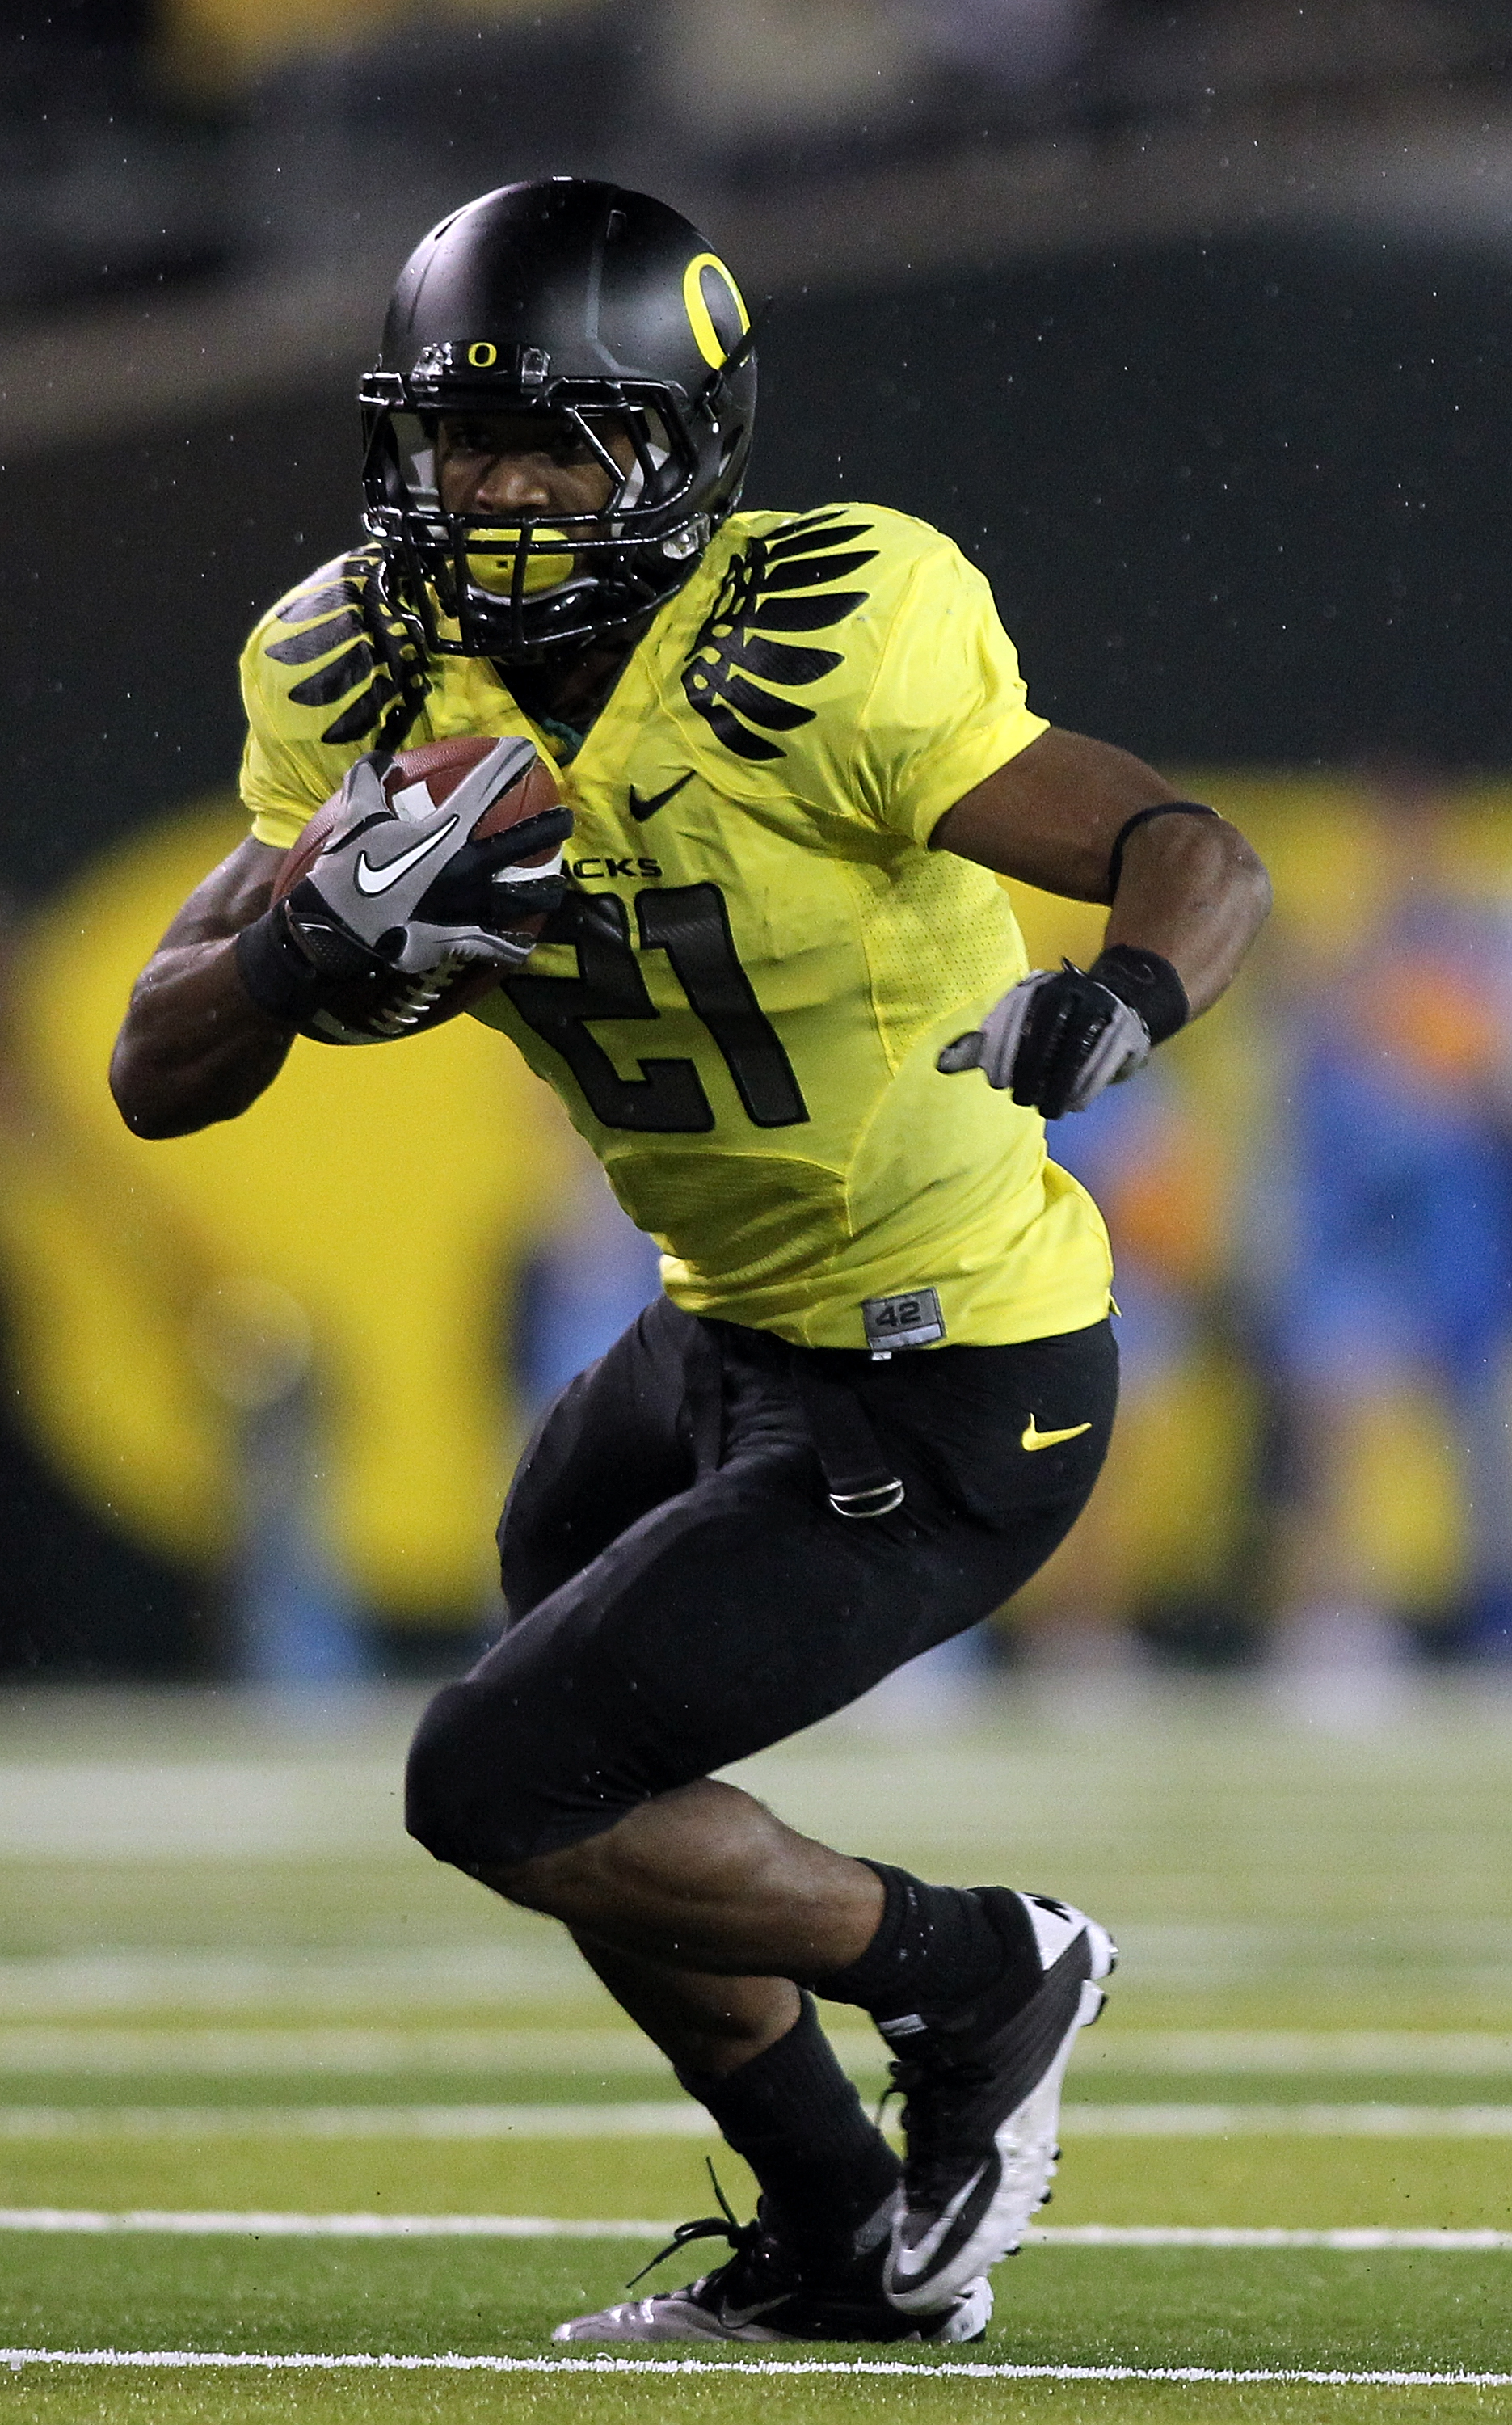 EUGENE, OR - OCTOBER 21:  LaMichael James #21 of the Oregon Ducks runs the ball against the UCLA Bruins on October 21, 2010 at the Autzen Stadium in Eugene, Oregon.  (Photo by Jonathan Ferrey/Getty Images)